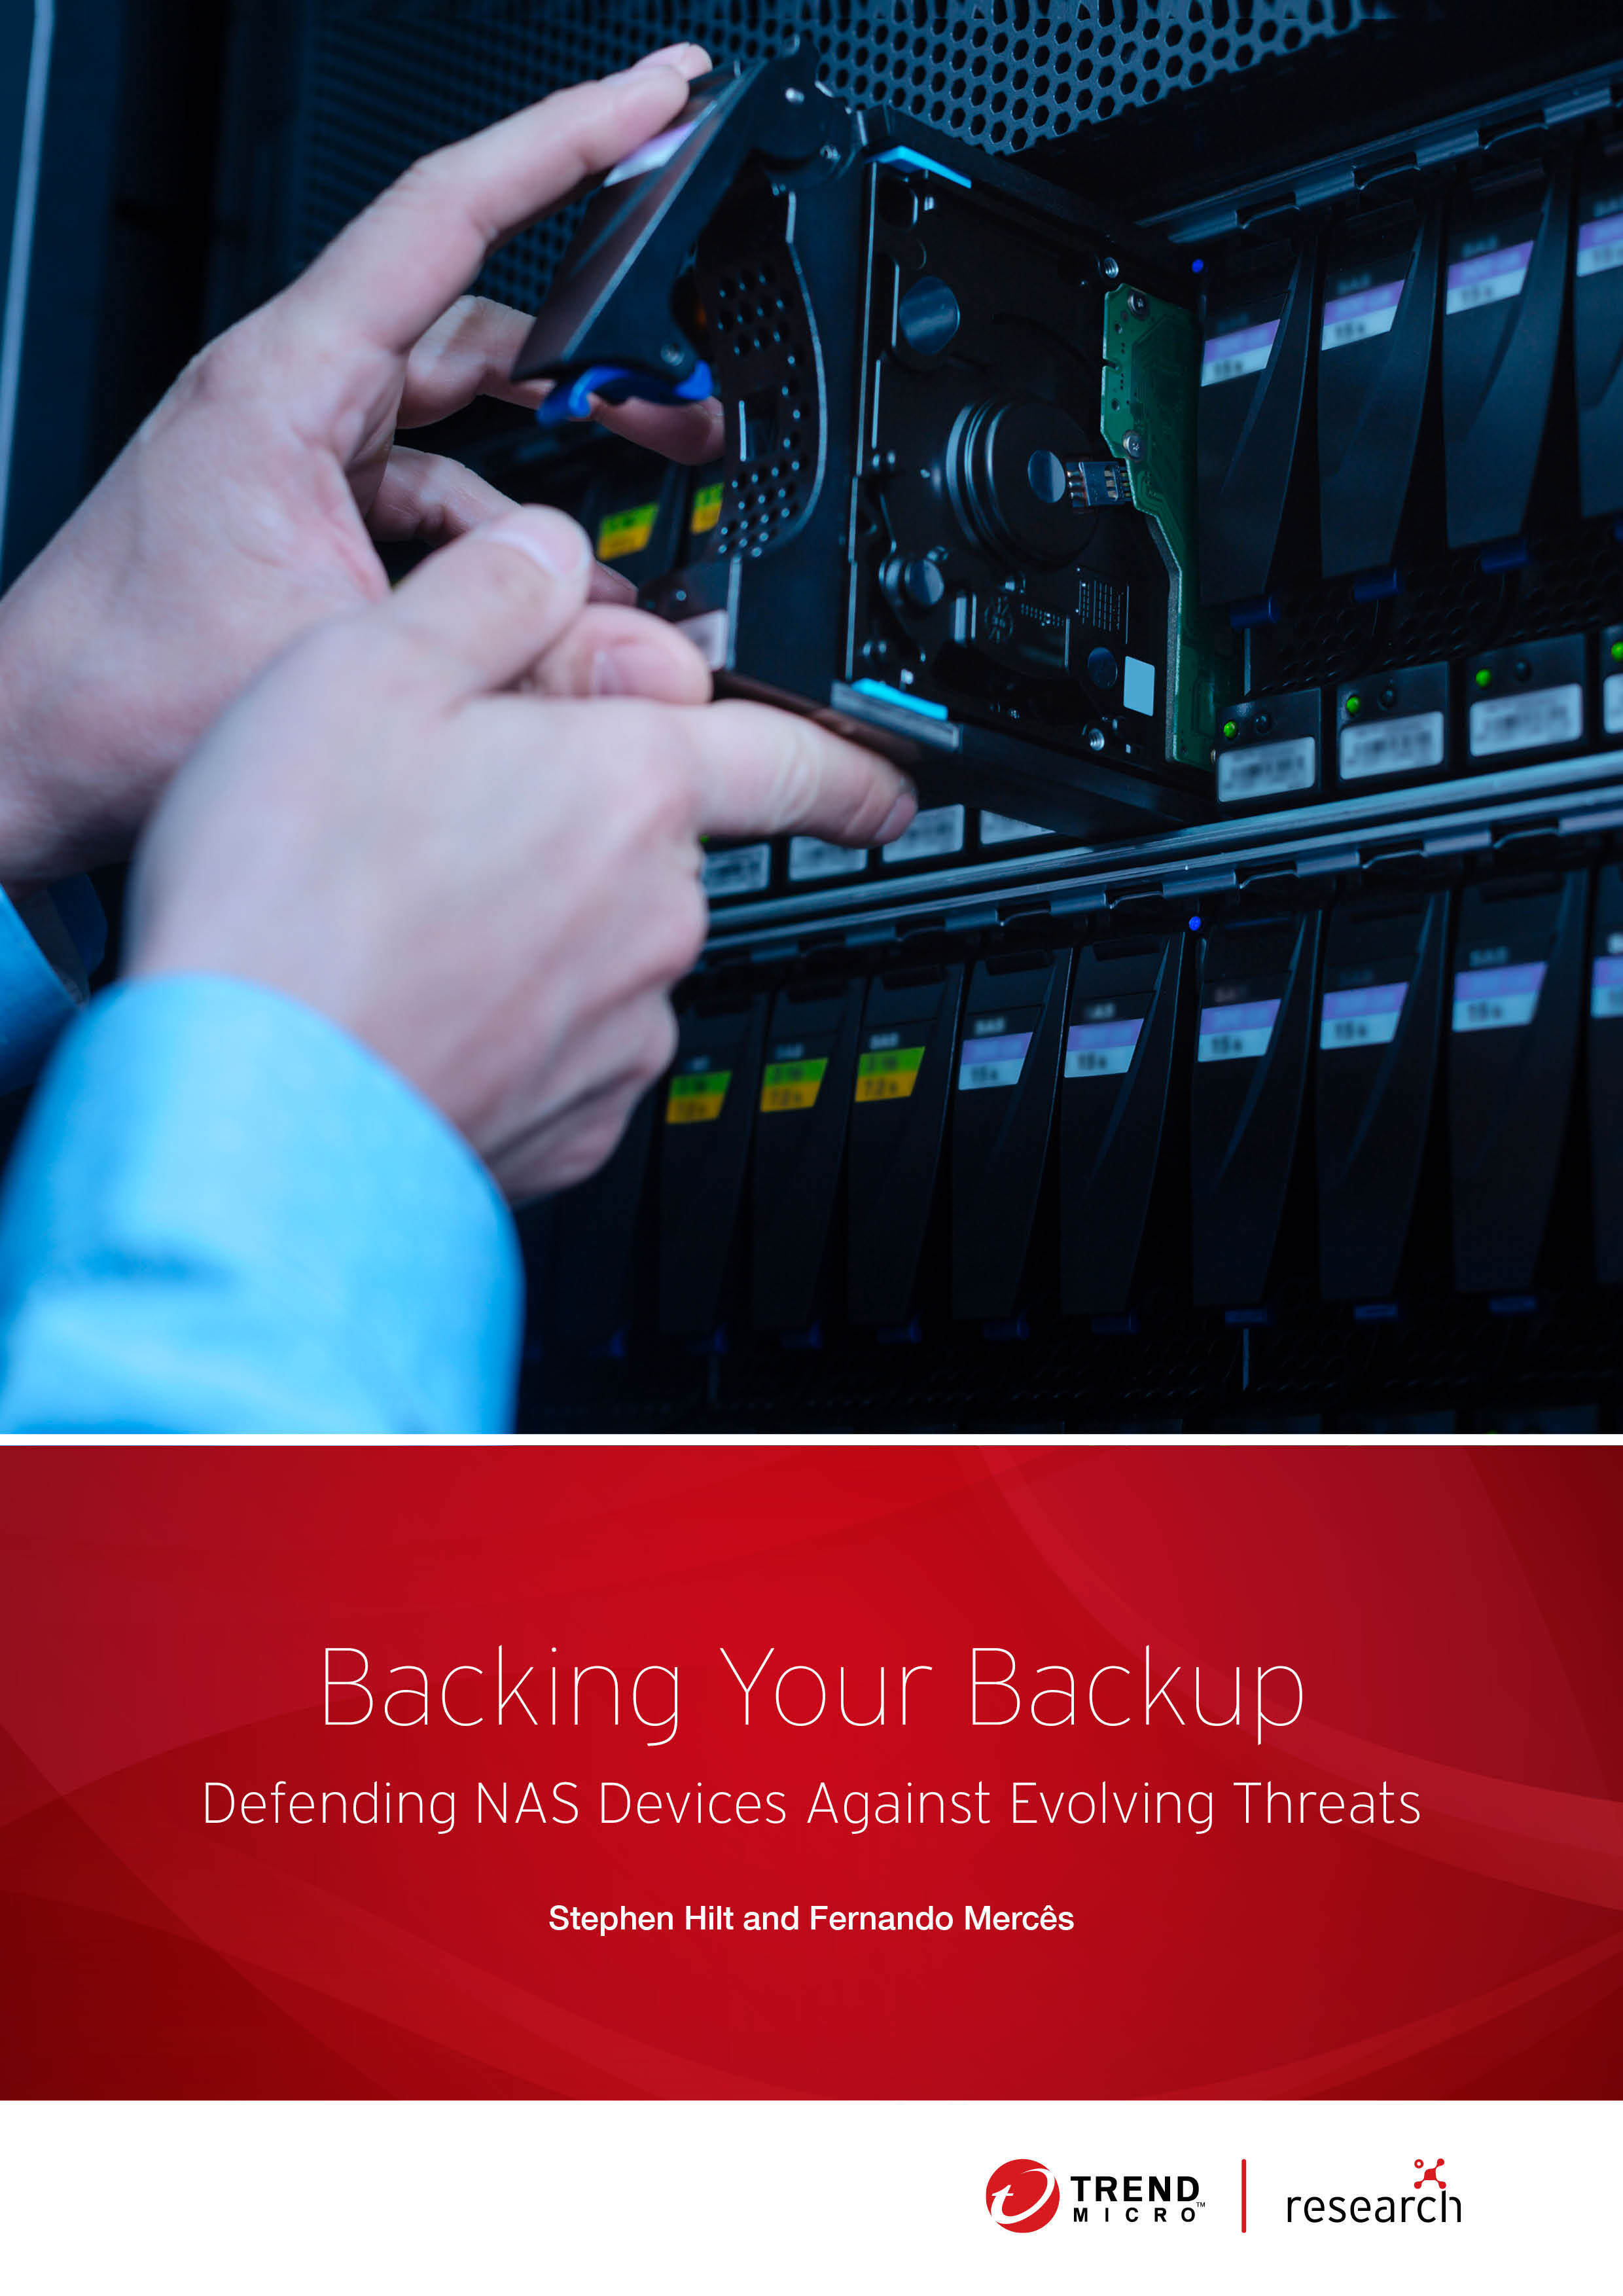 Backing Your Backup: Defending NAS Devices Against Evolving Threats